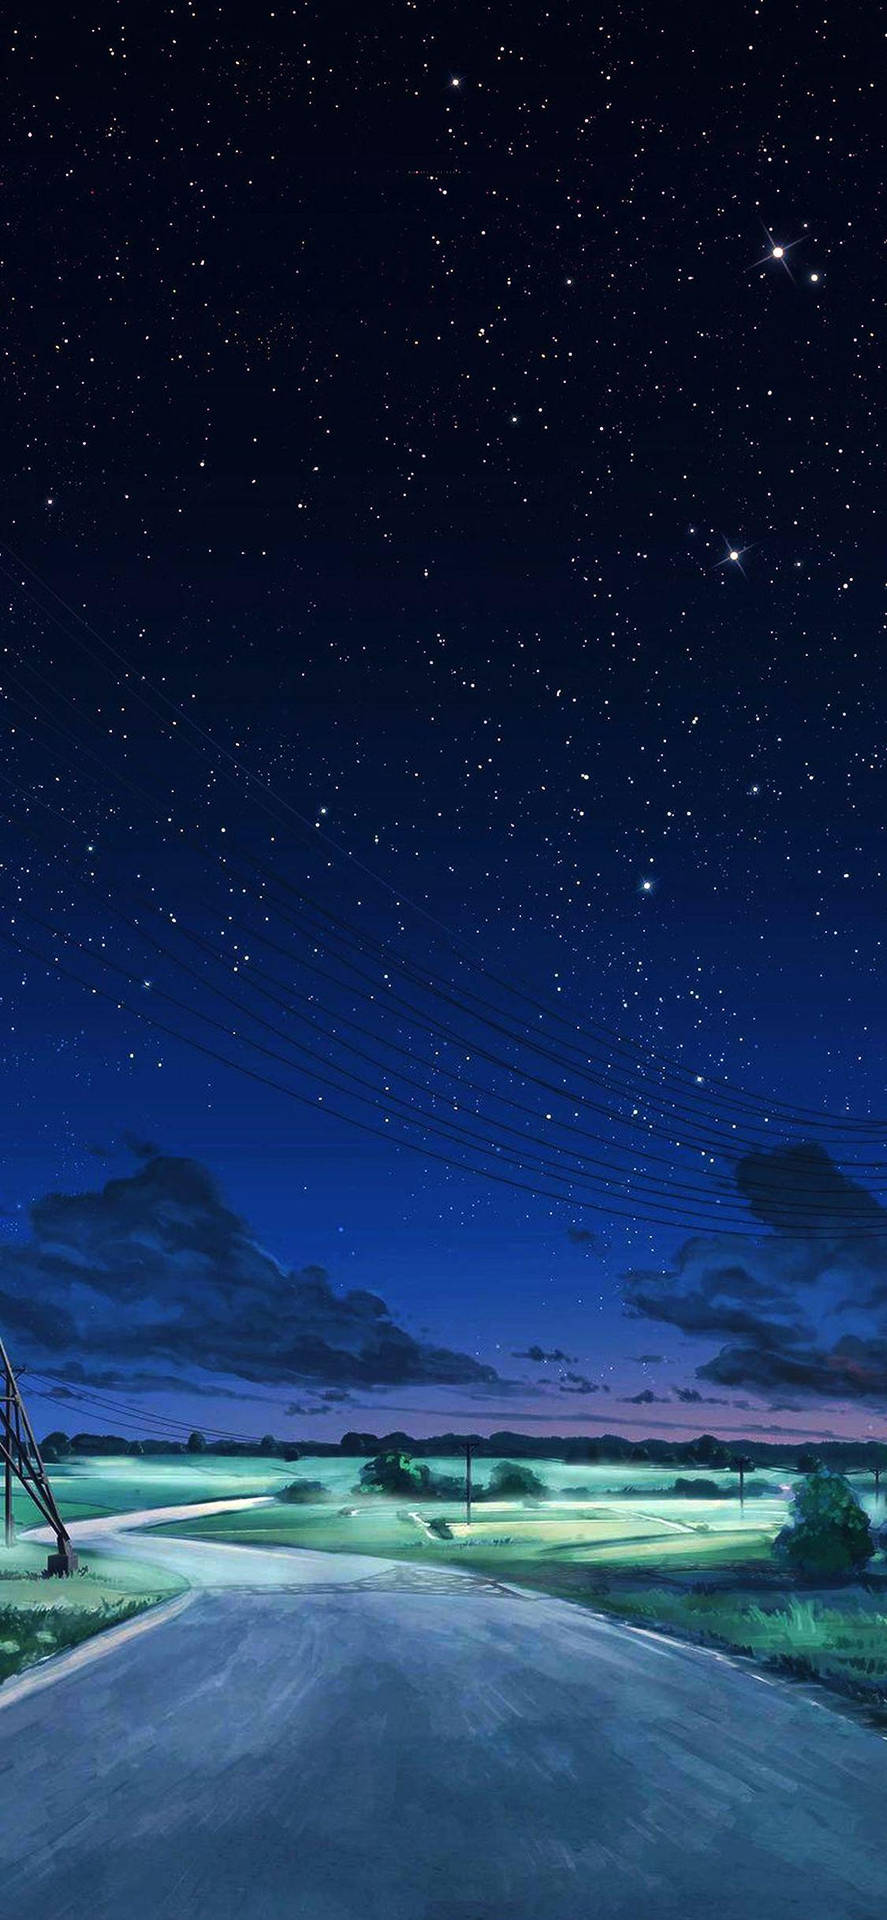 A Colorful, Mysterious Anime Scenery Wallpaper